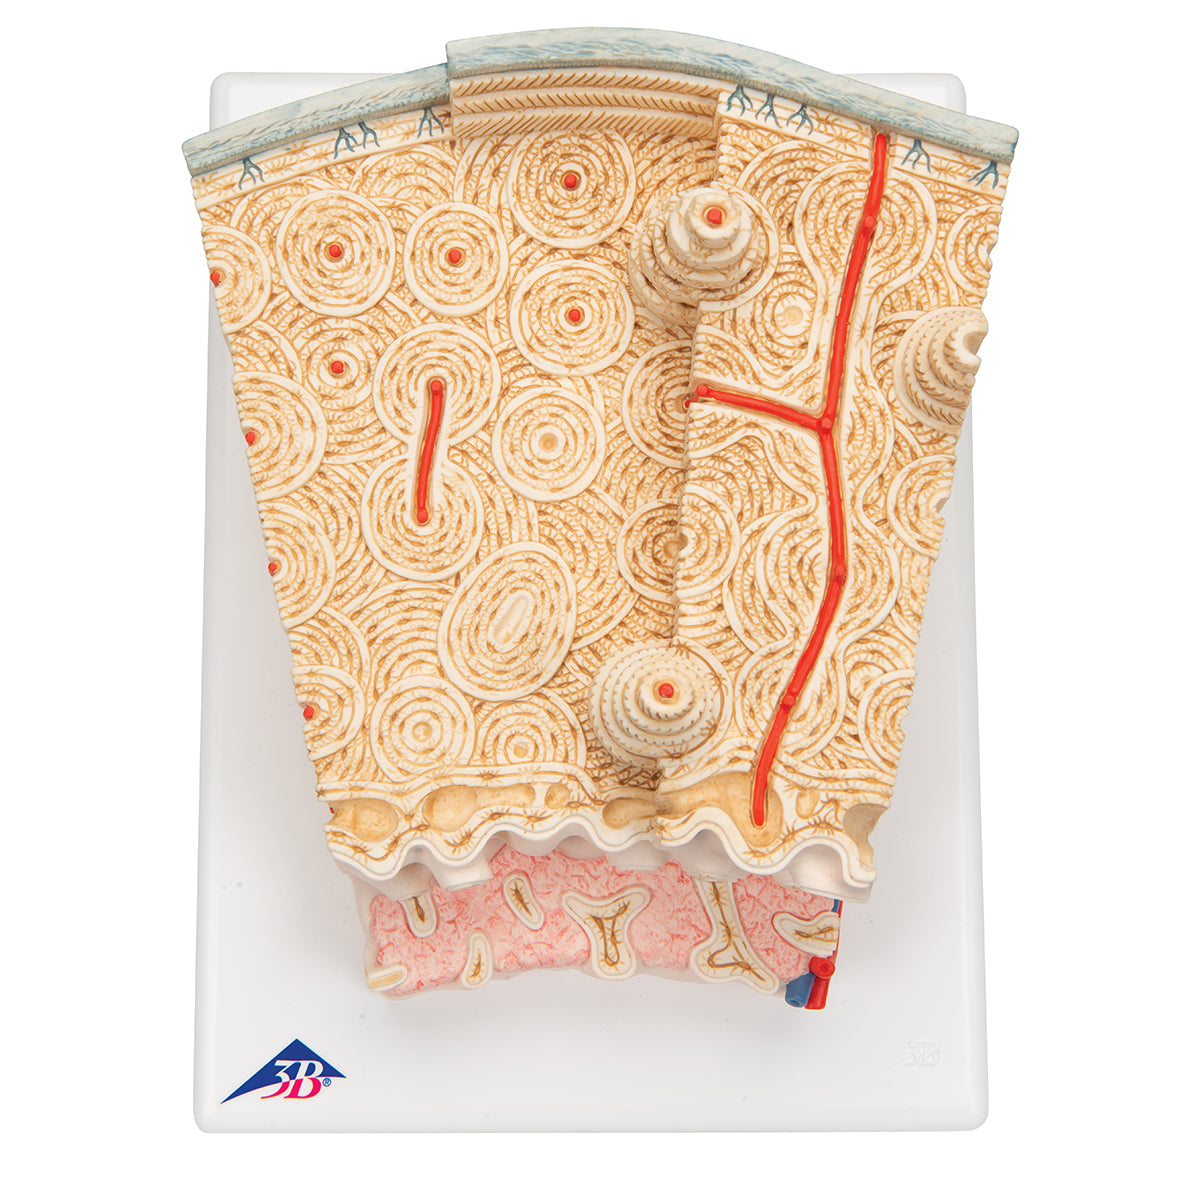 Detailed model of bone tissue incl. blood vessels in a microscopic perspective